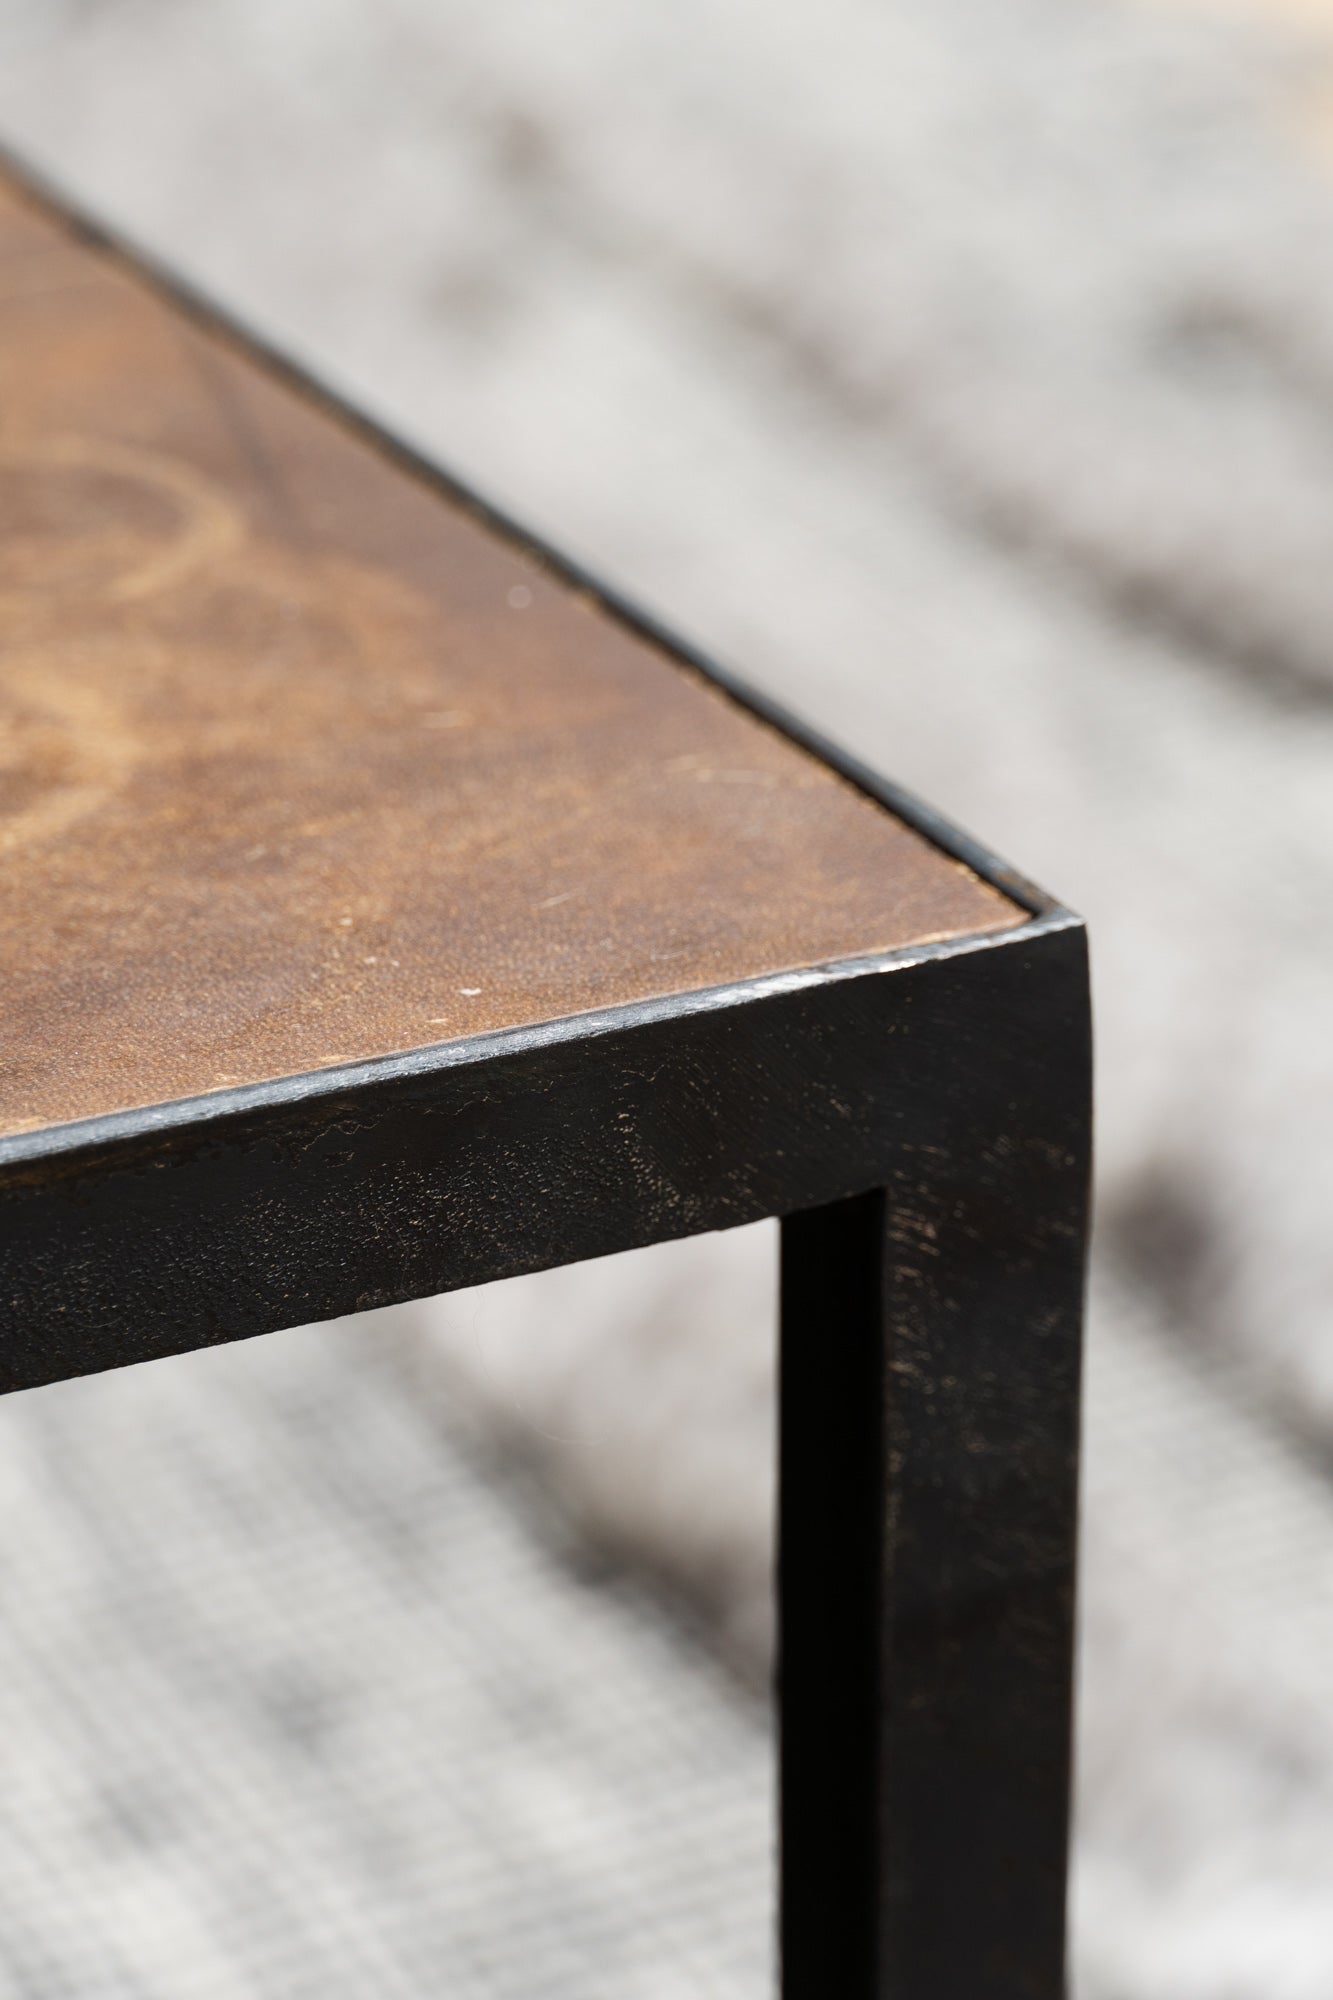 Details of the framework of the Mesa Coffee Table.